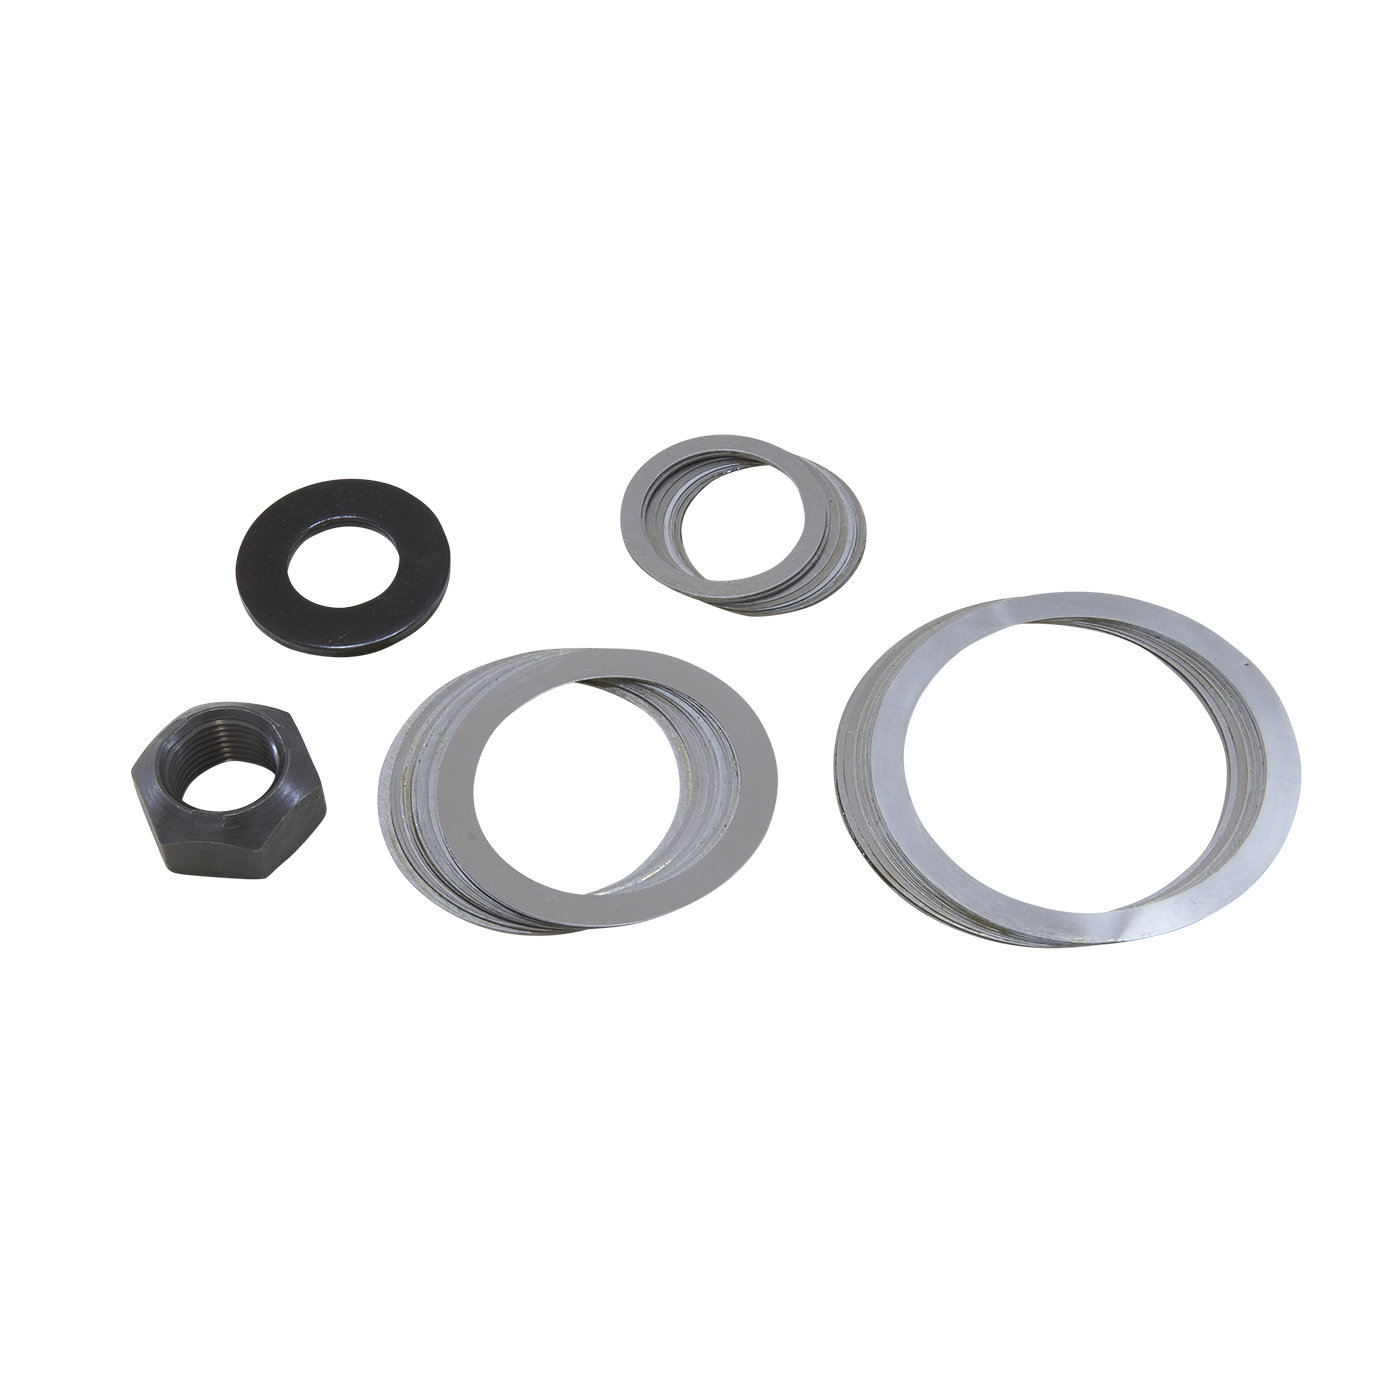 SK 706087 Replacement Carrier Shim Kit for Dana 30/44 Differential with 19-Spline Axle Yukon 